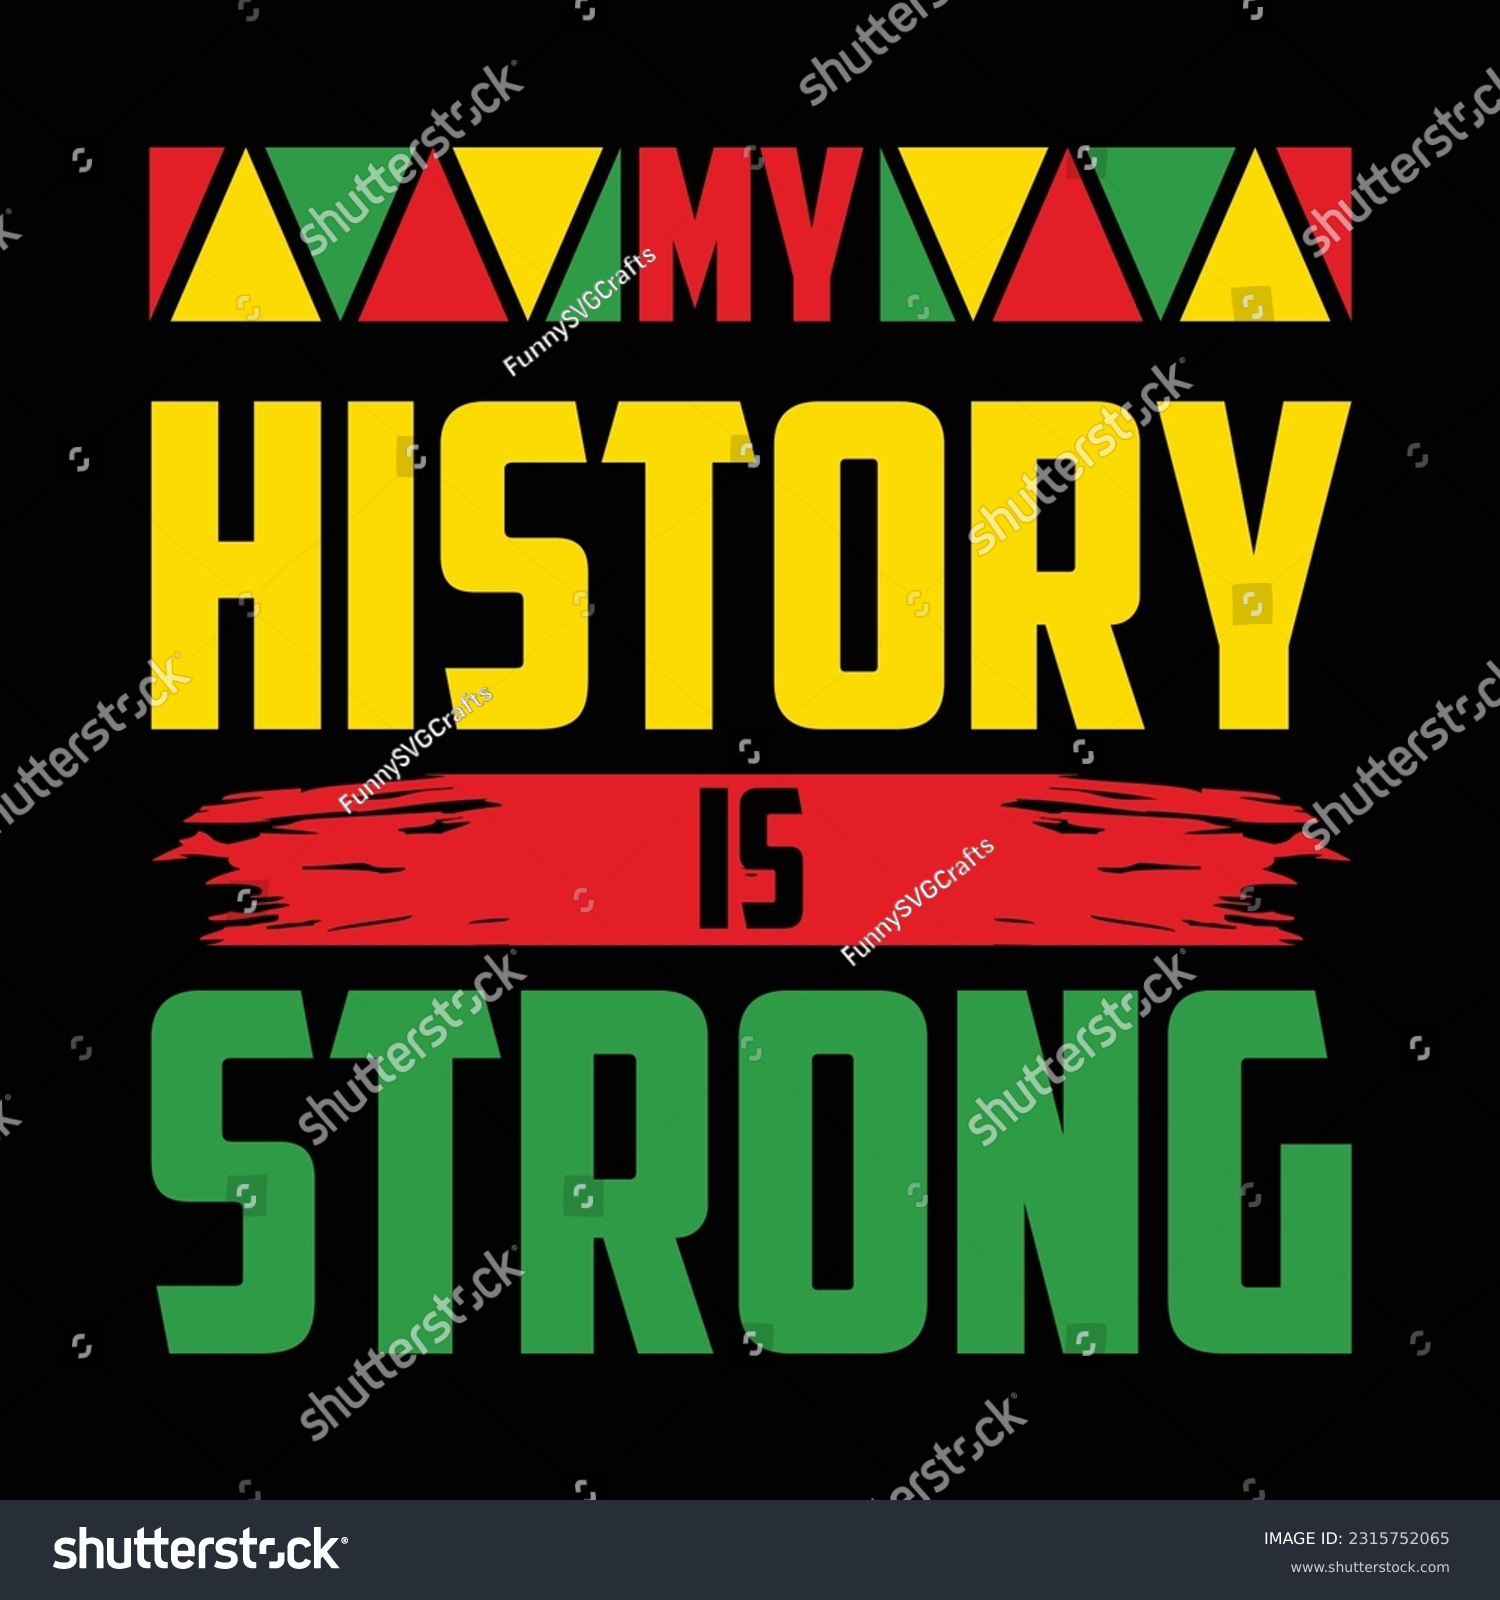 SVG of My History is Strong Shirt, Juneteenth Shirt, Black Women, Black History, BLM, Celebrate Juneteenth, Black Life, 1865 Free-ish, Juneteenth shirt Print Template svg